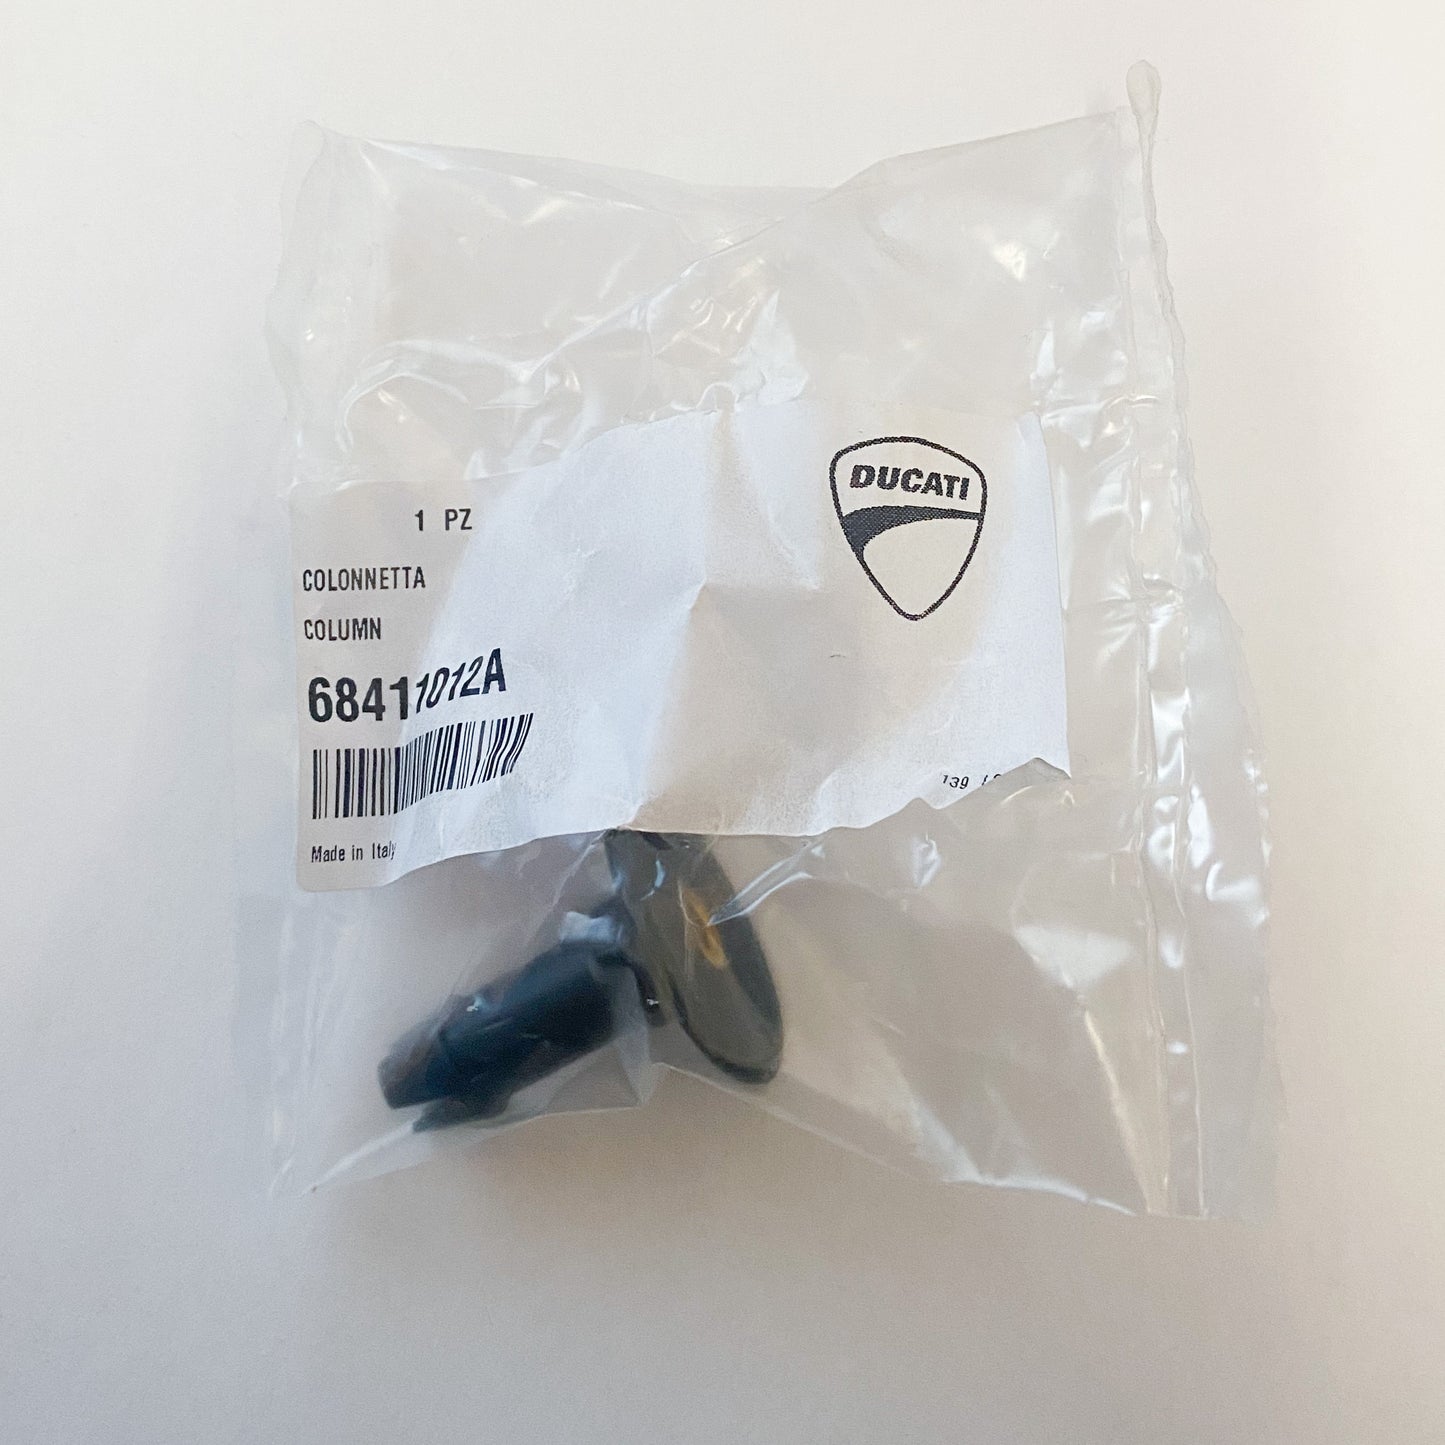 DUCATI SEAT COVER FASTENING STUD BOLT. 68411012A